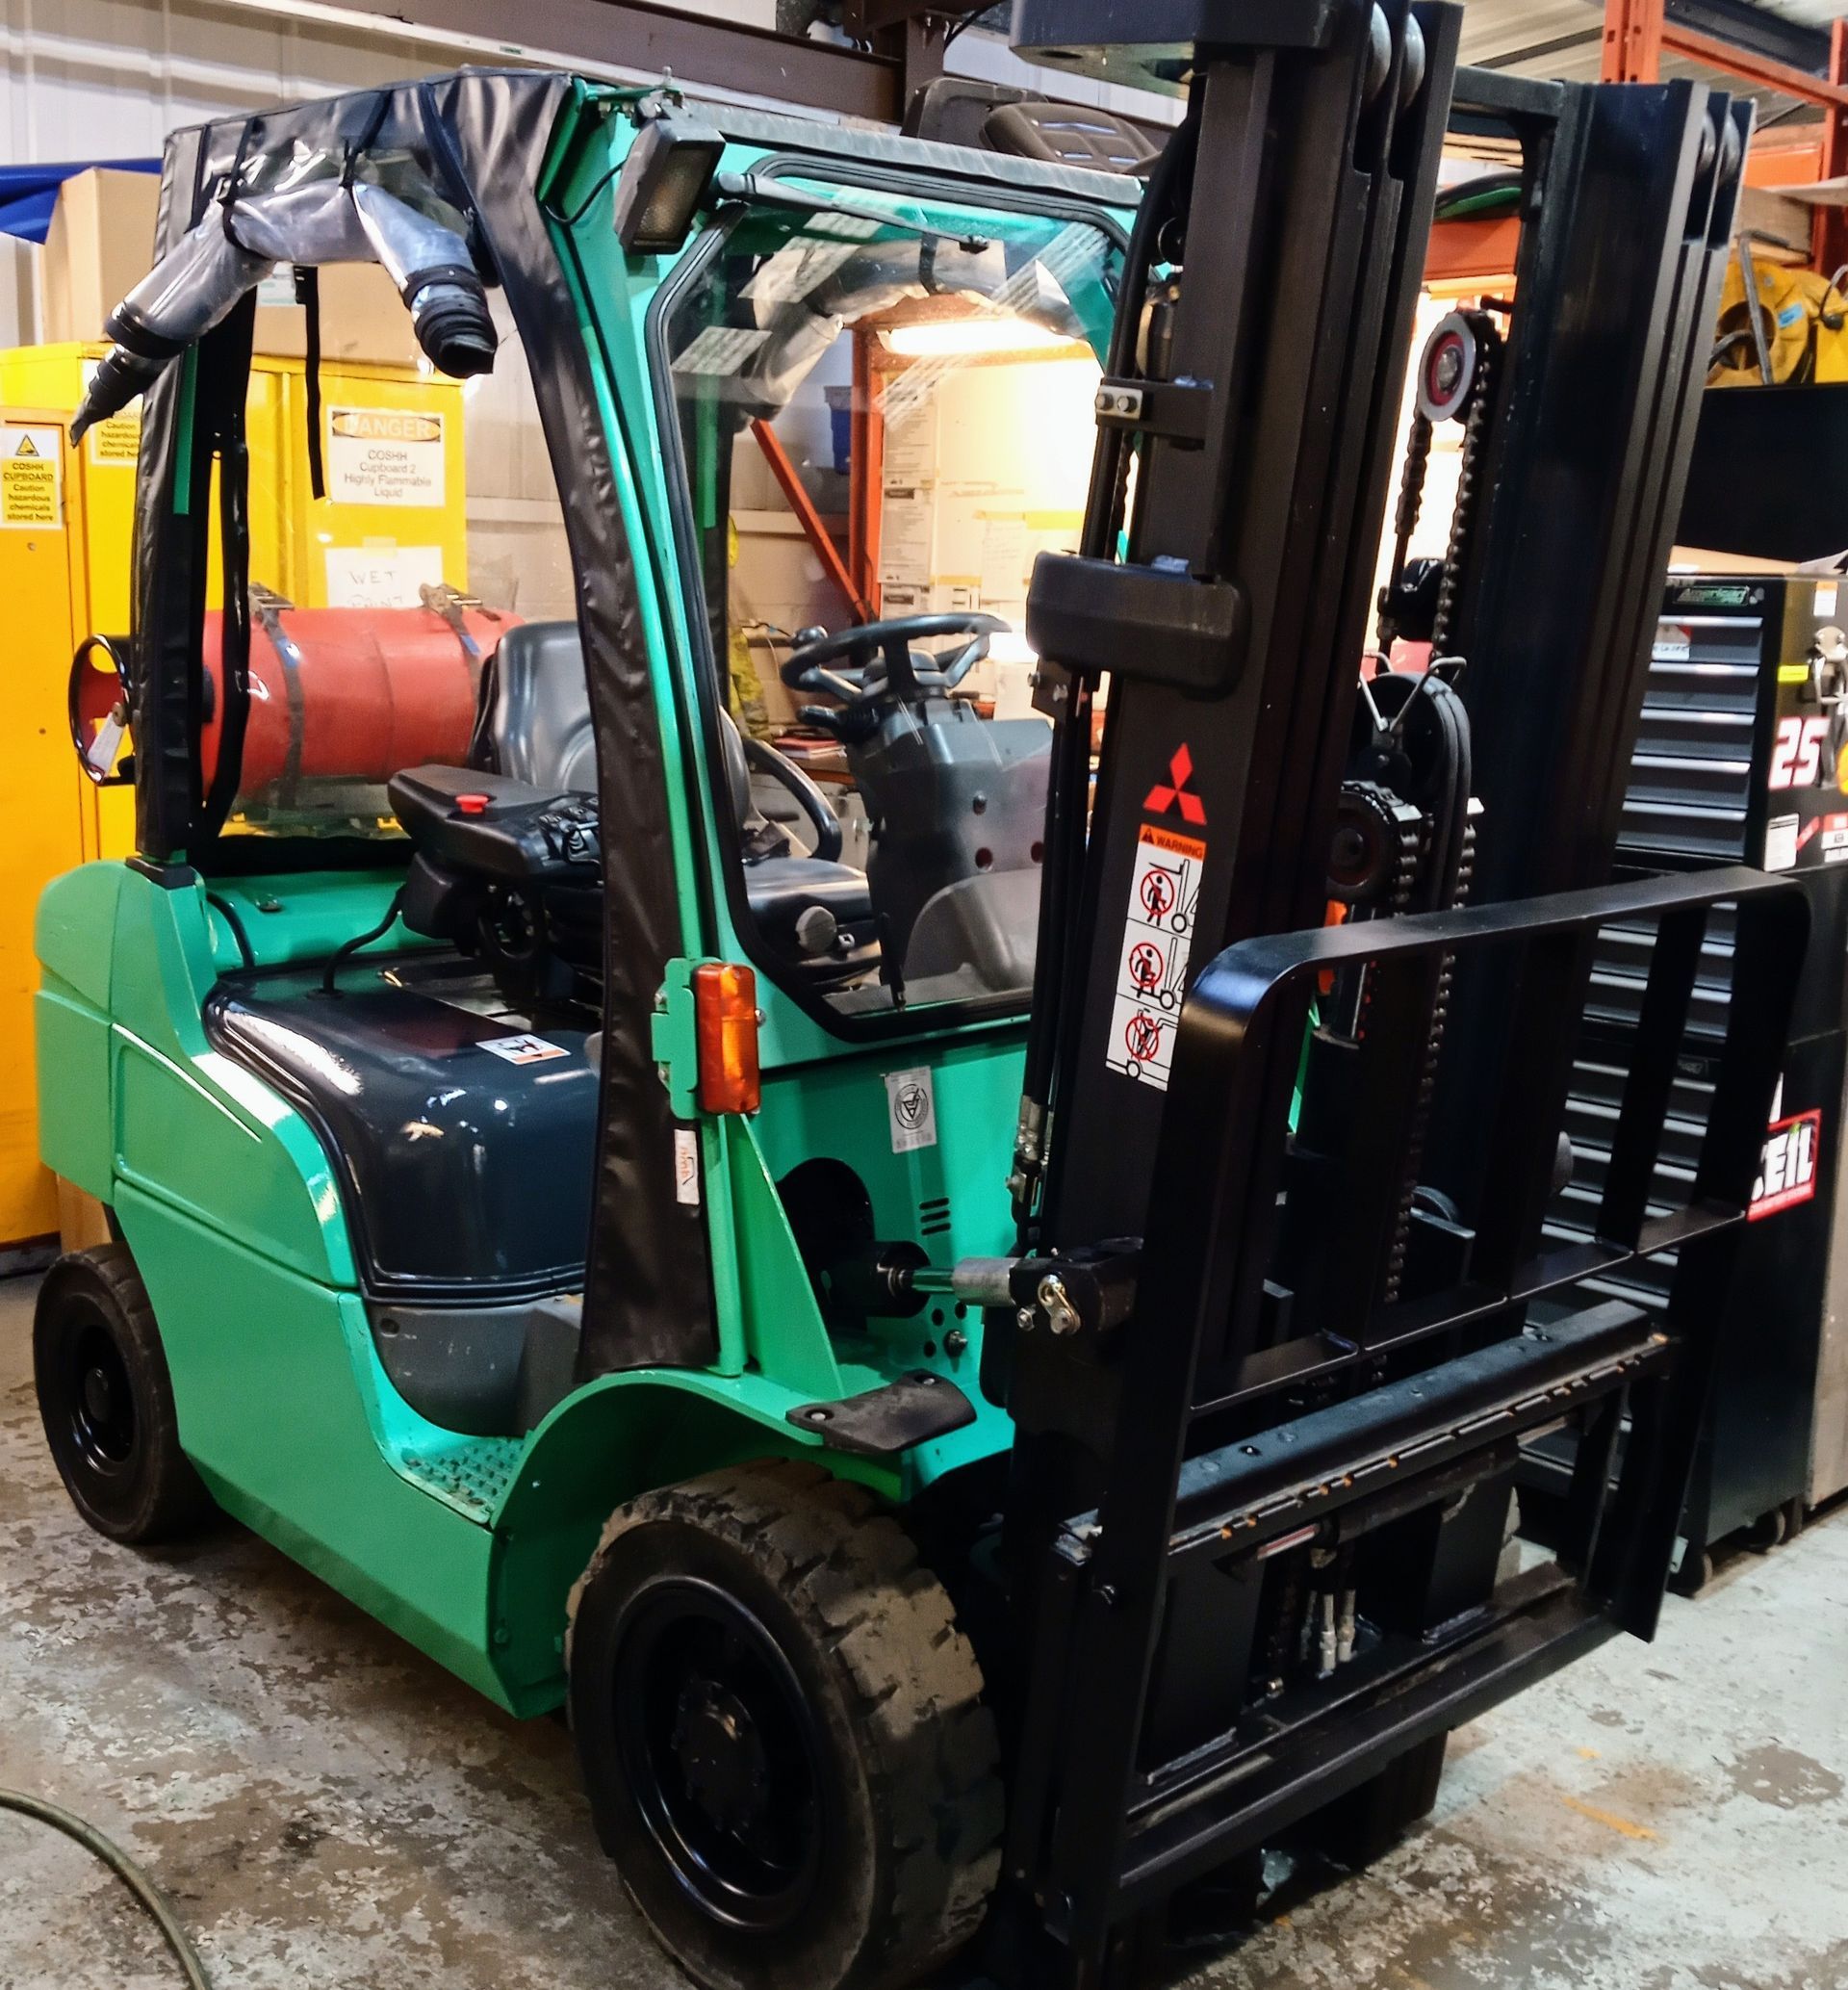 A green and black forklift is parked in a garage